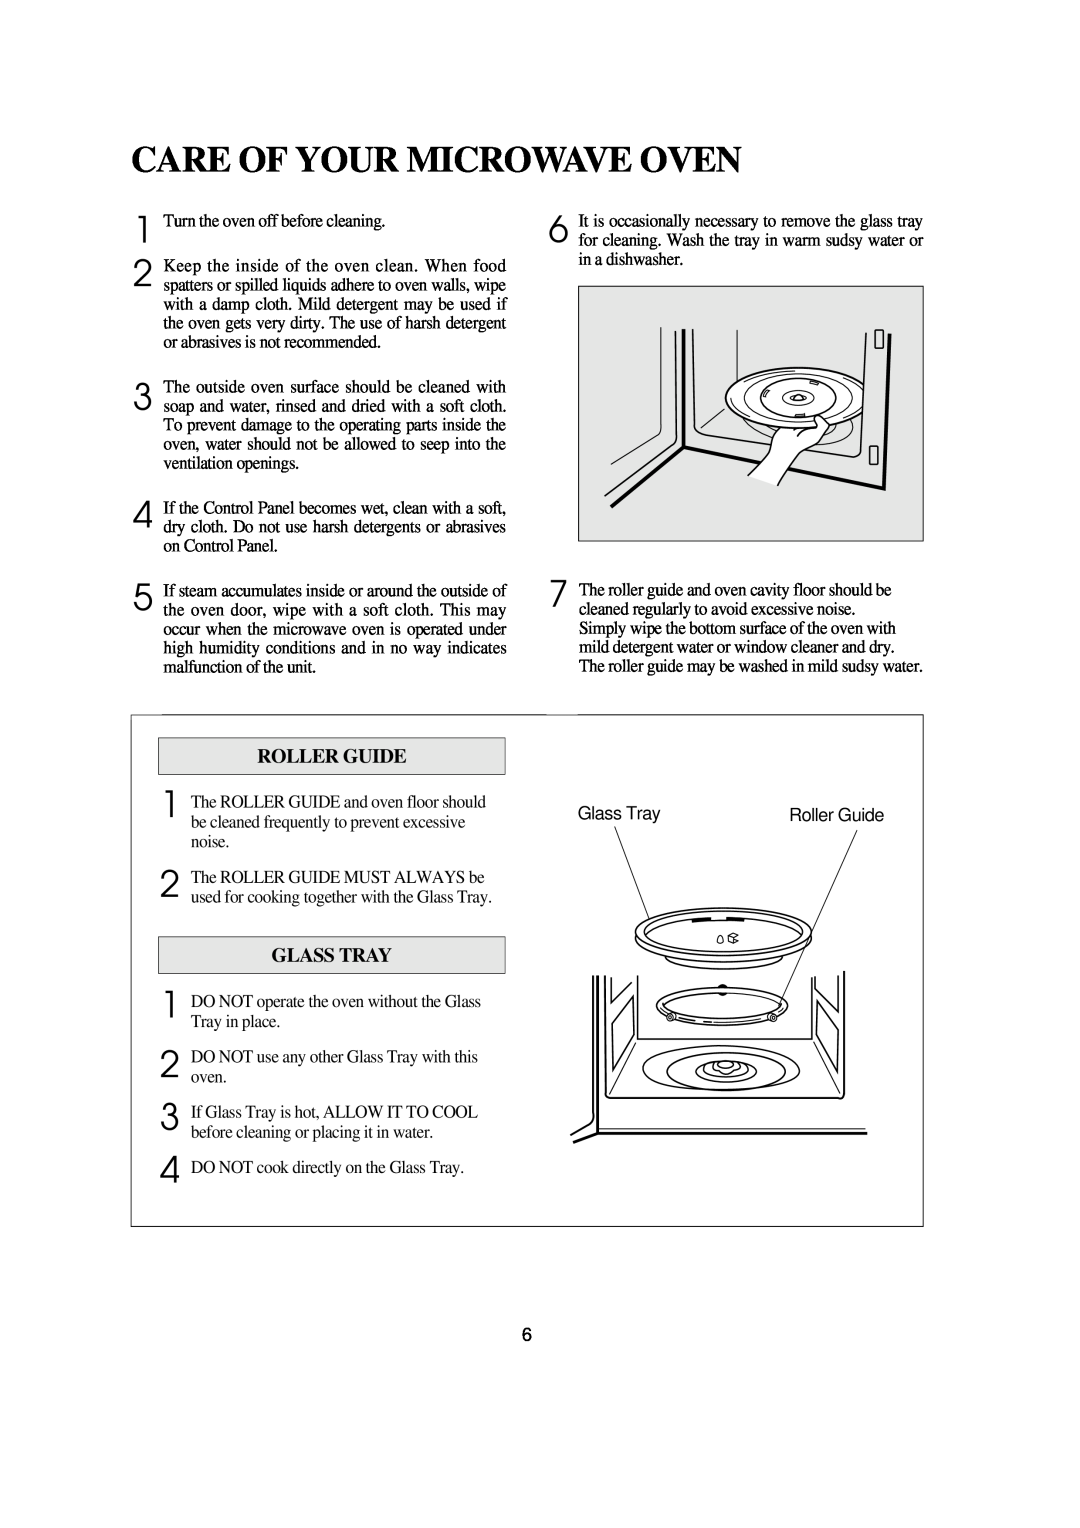 Emerson MW8993WC/BC owner manual Care Of Your Microwave Oven, Roller Guide 